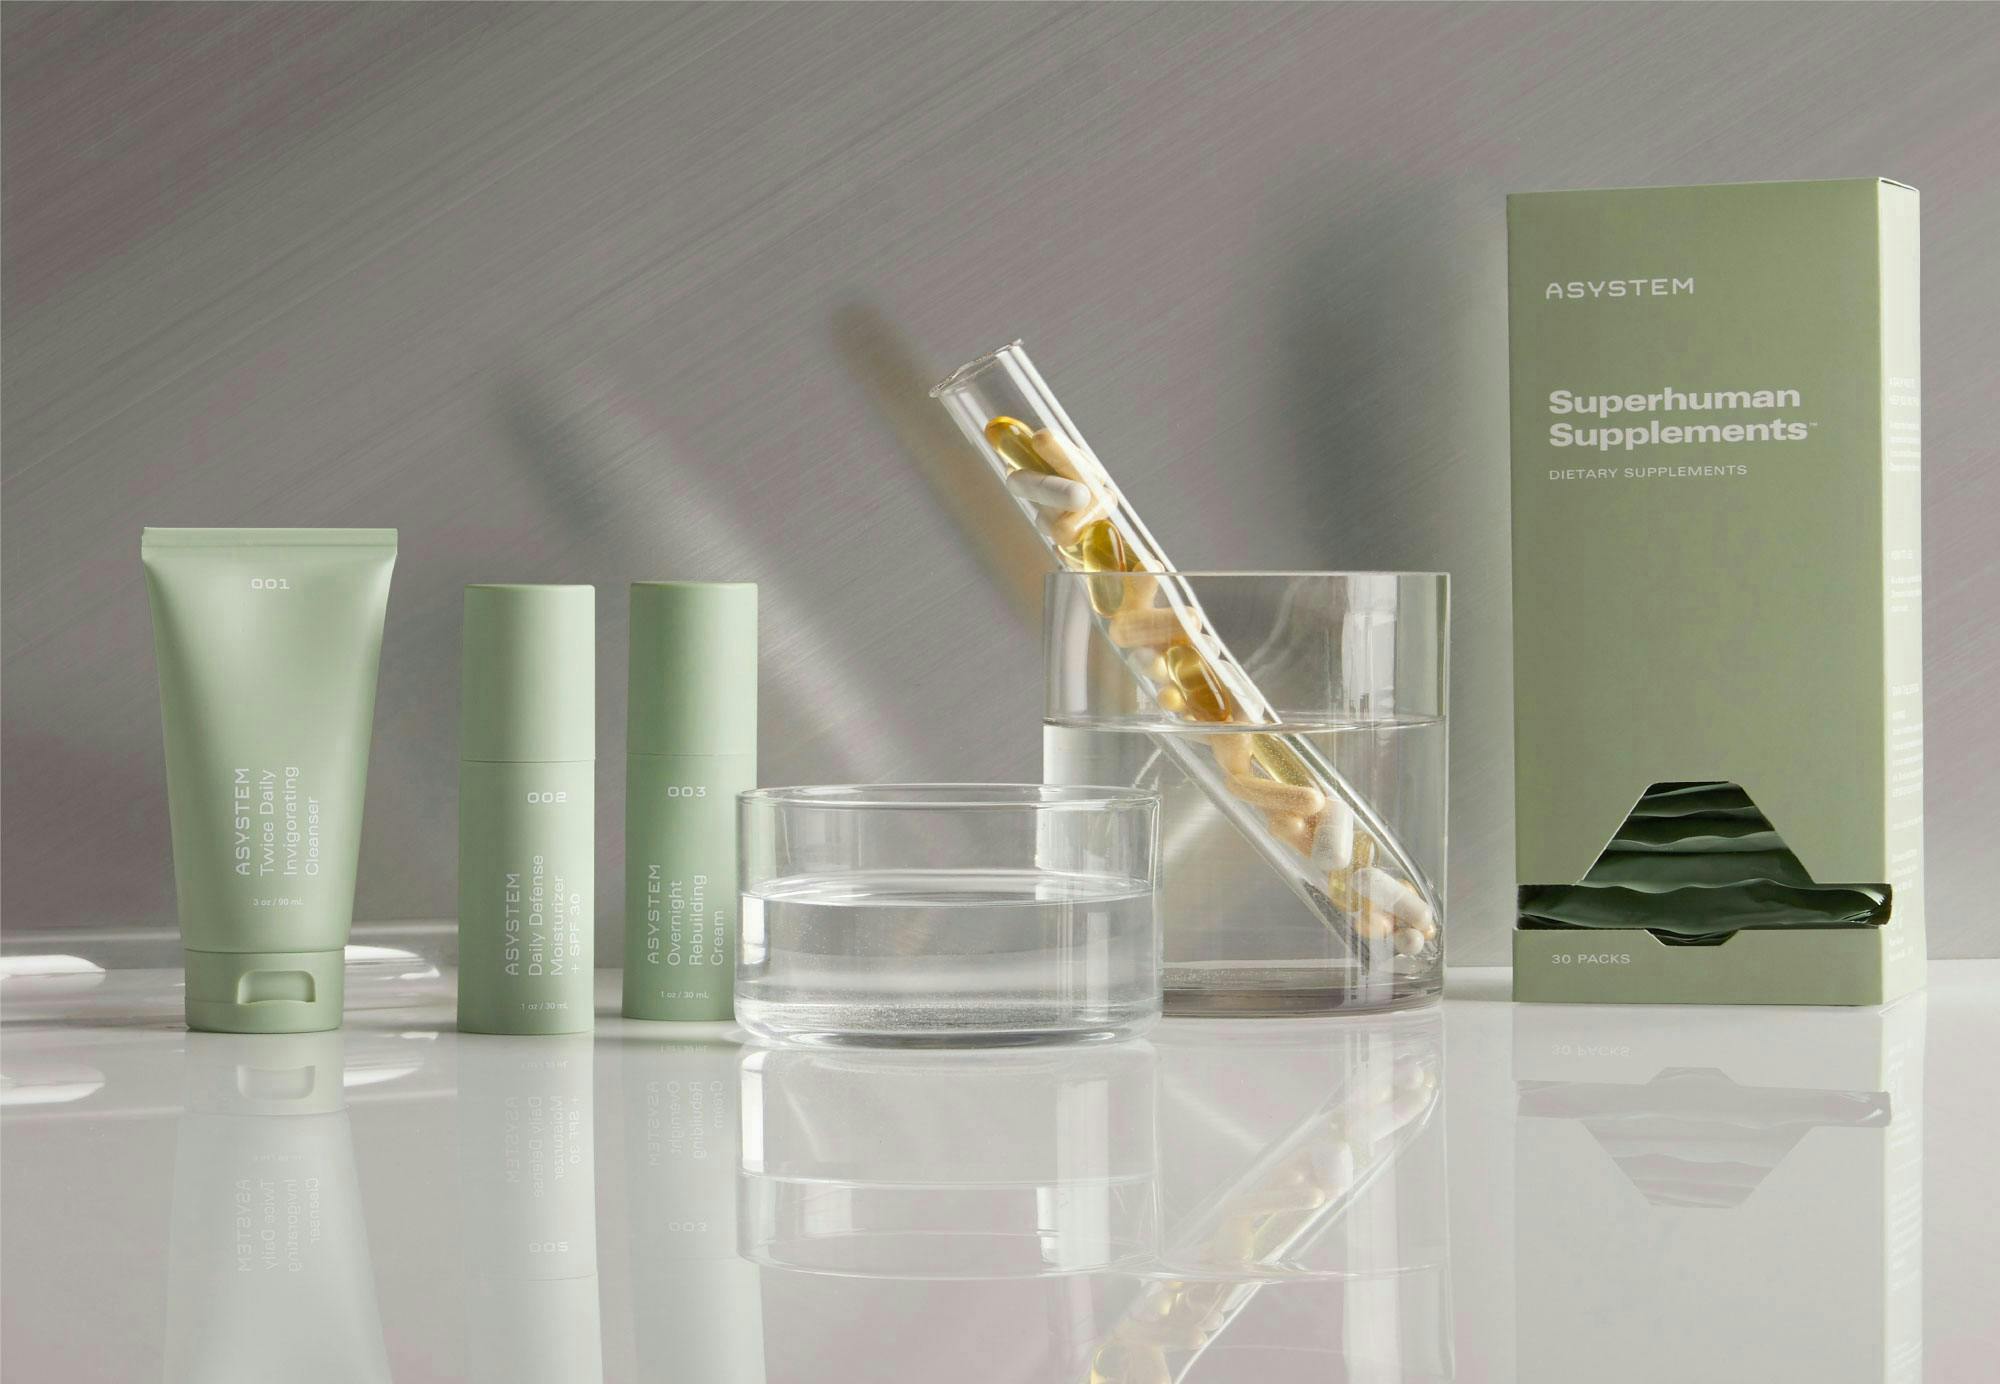 superhuman supplements photograph with green packaging on a grey table top against a grey backdrop 